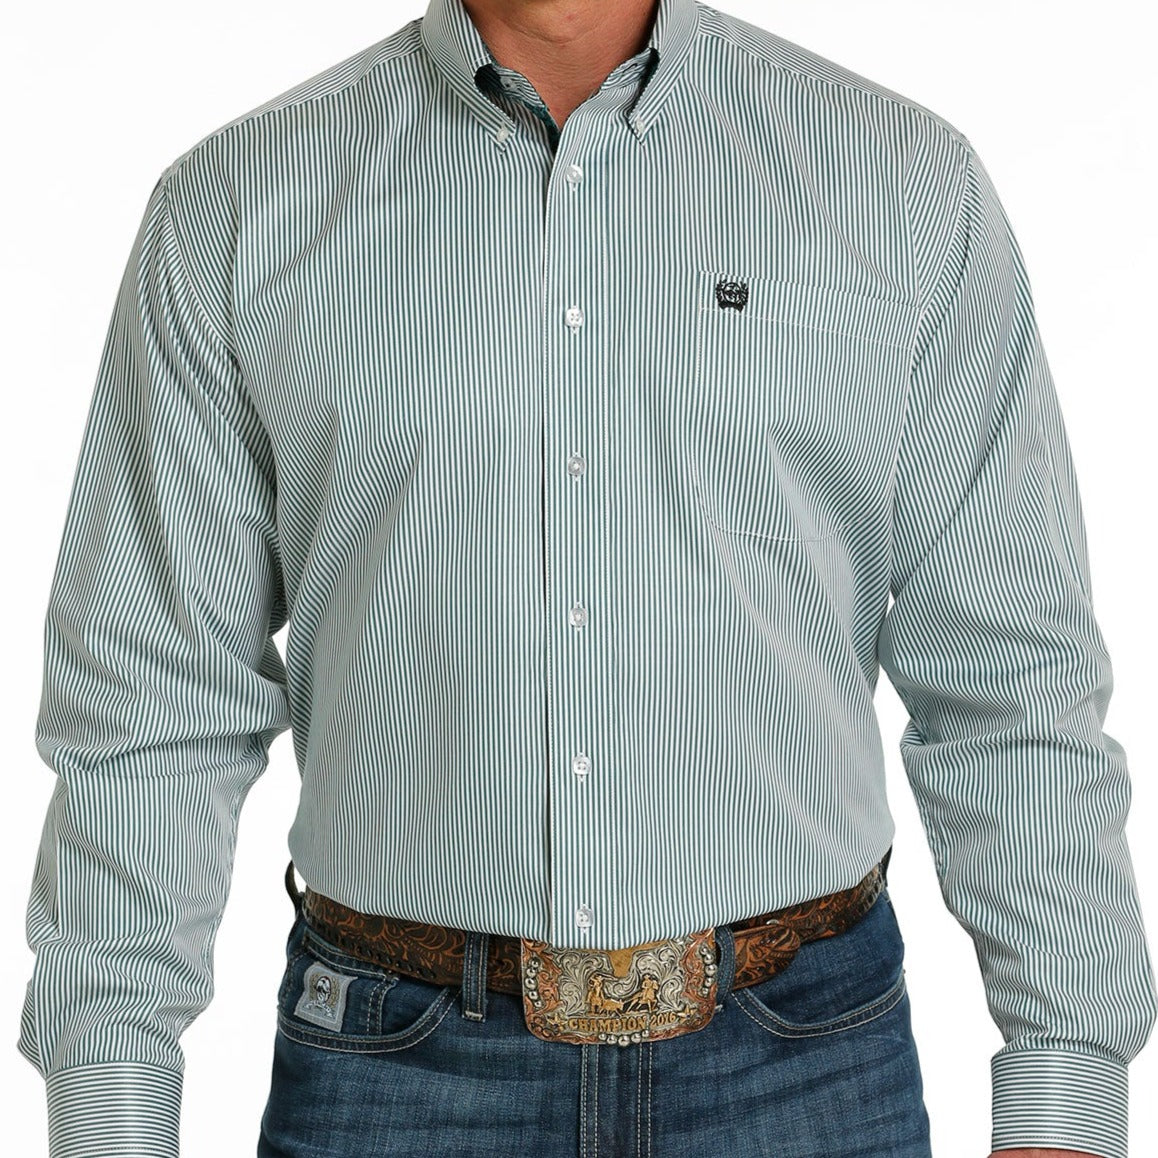 Cinch Men's White and Teal Striped Long Sleeve Western Shirt